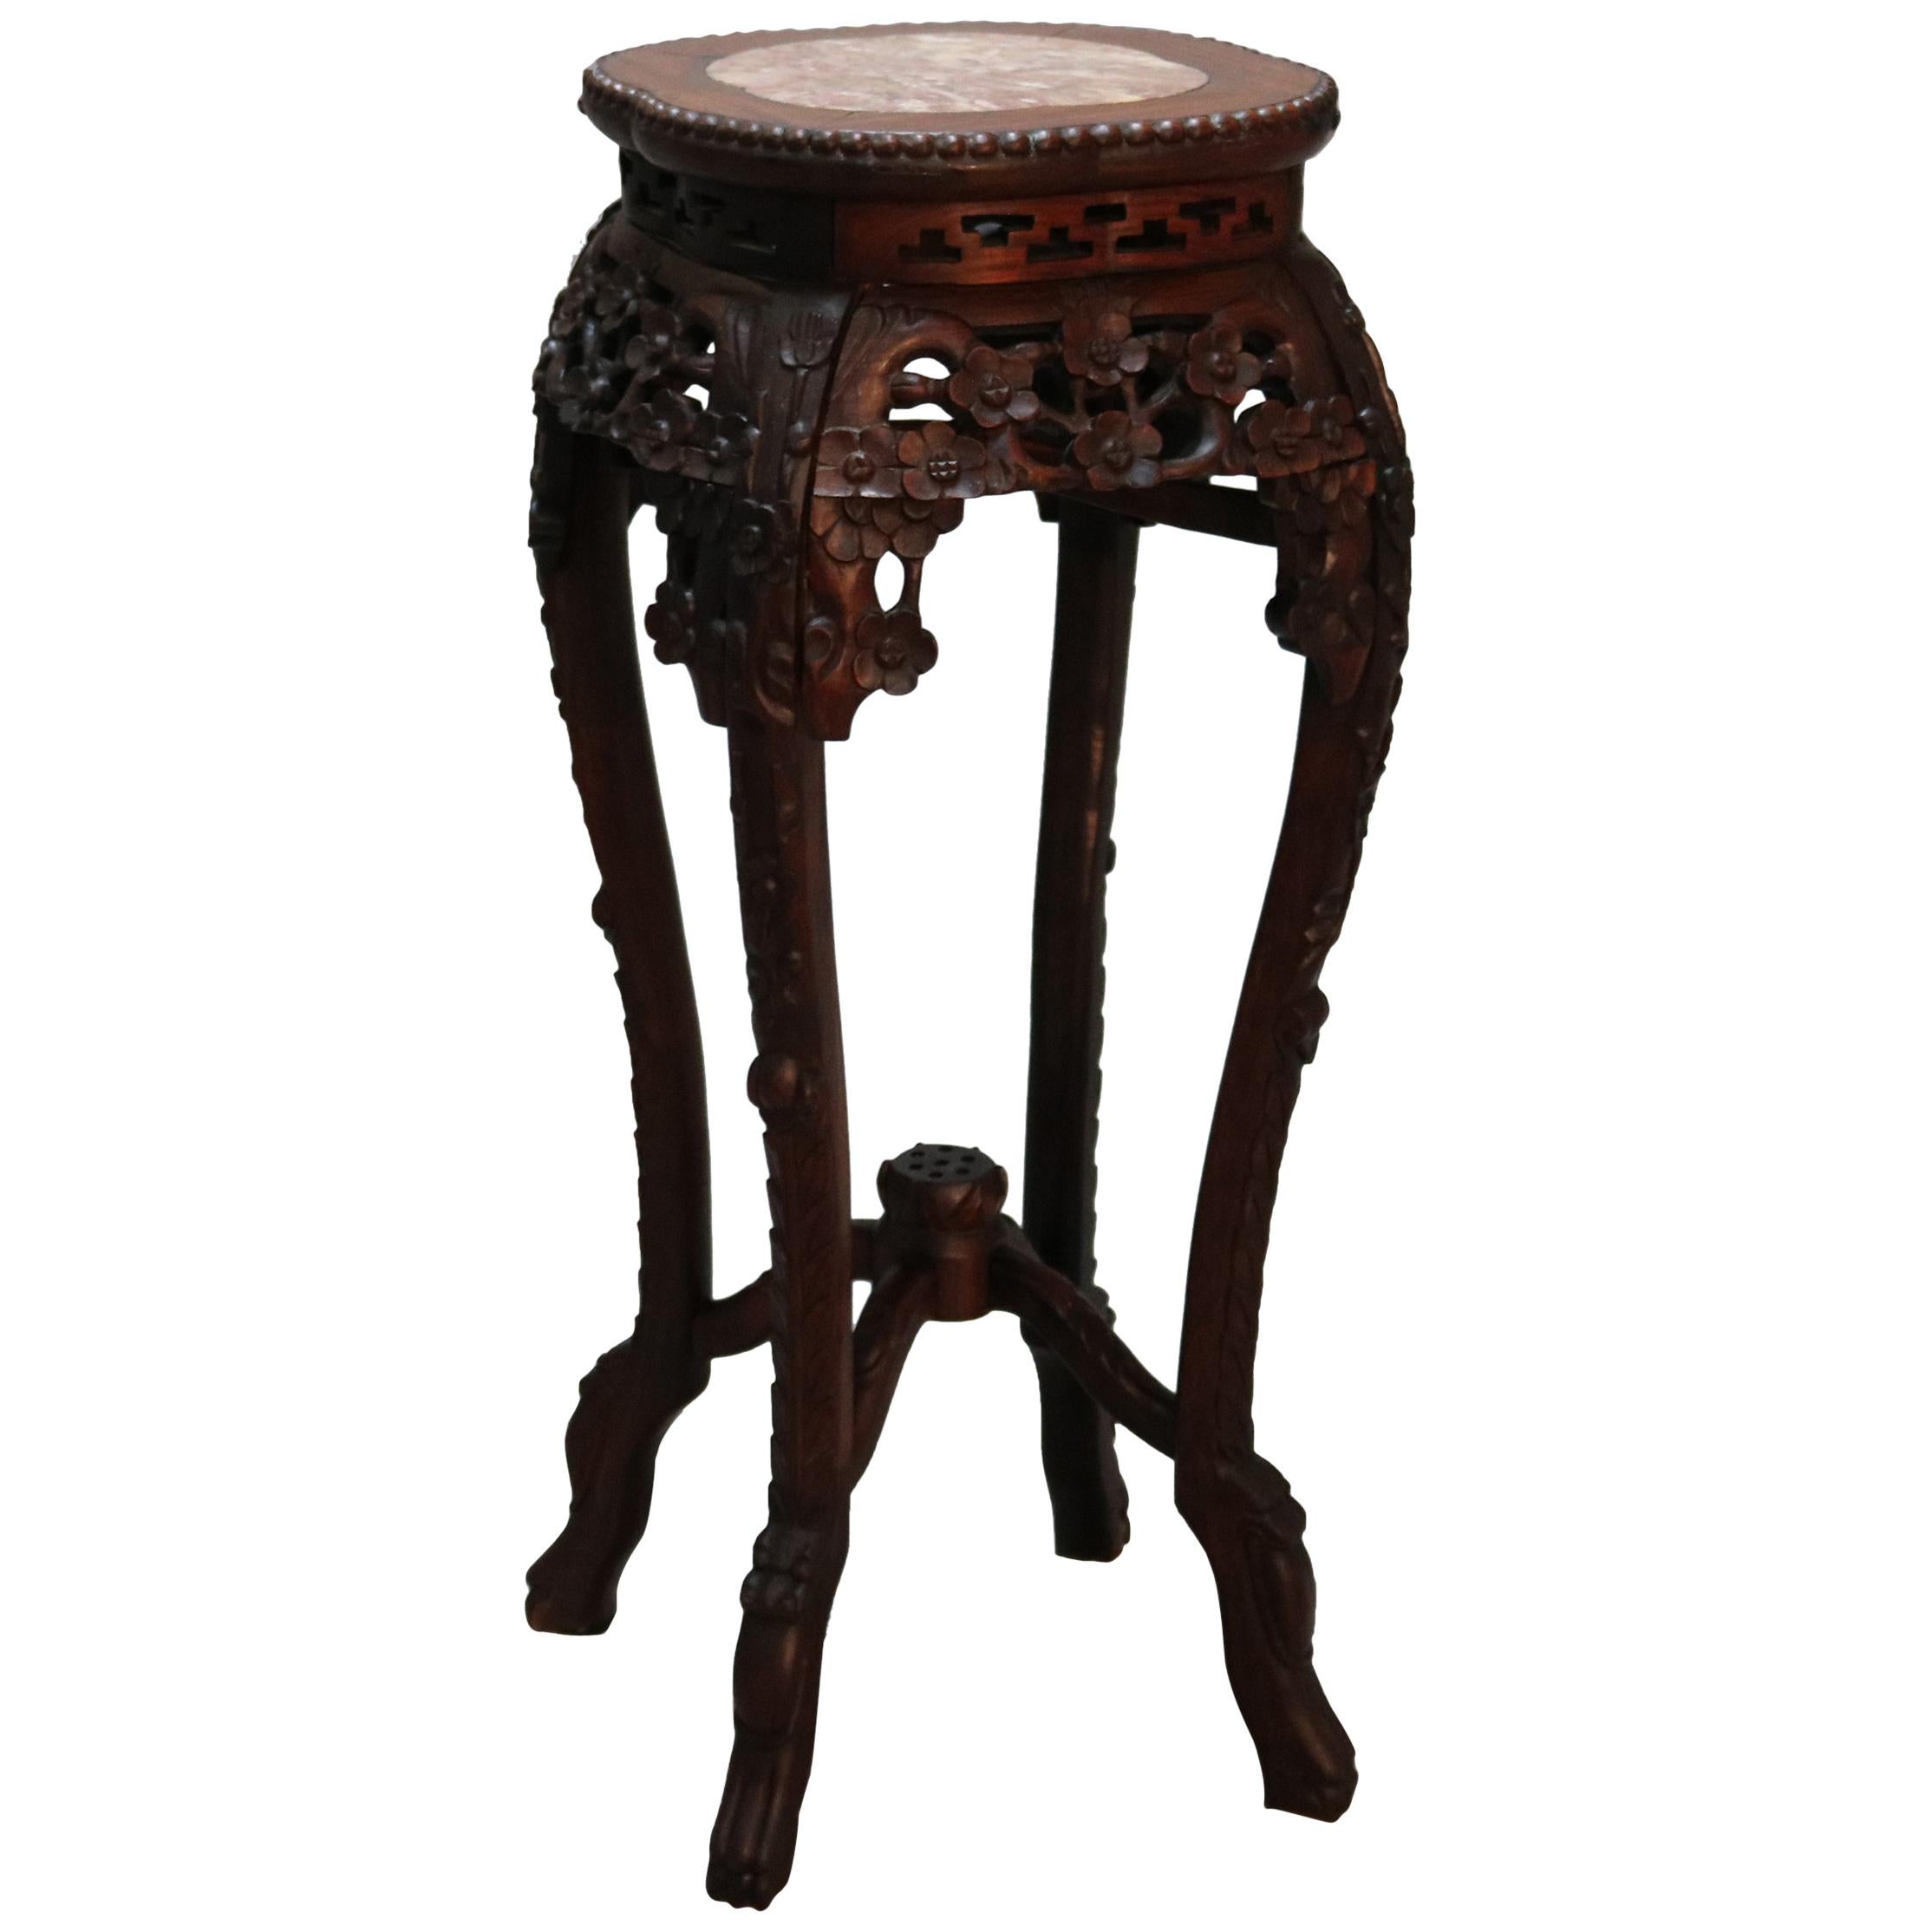 Antique Chinese Carved Hardwood & Marble Fern Stand, Circa 1900